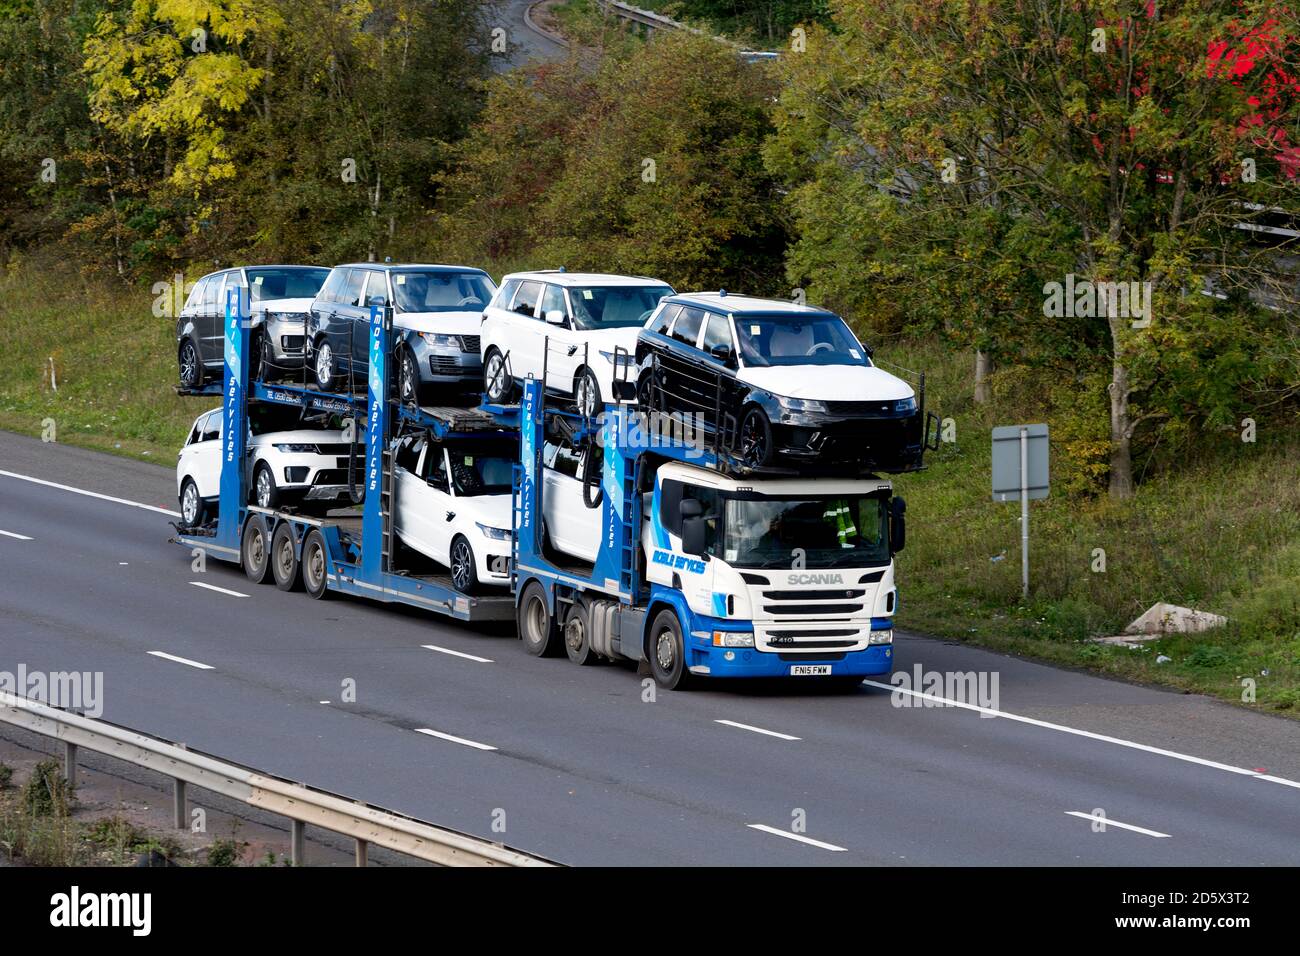 A Mobile Services Scania transporter carrying new Land Rover vehicles on the M40 motorway, Warwickshire, UK Stock Photo